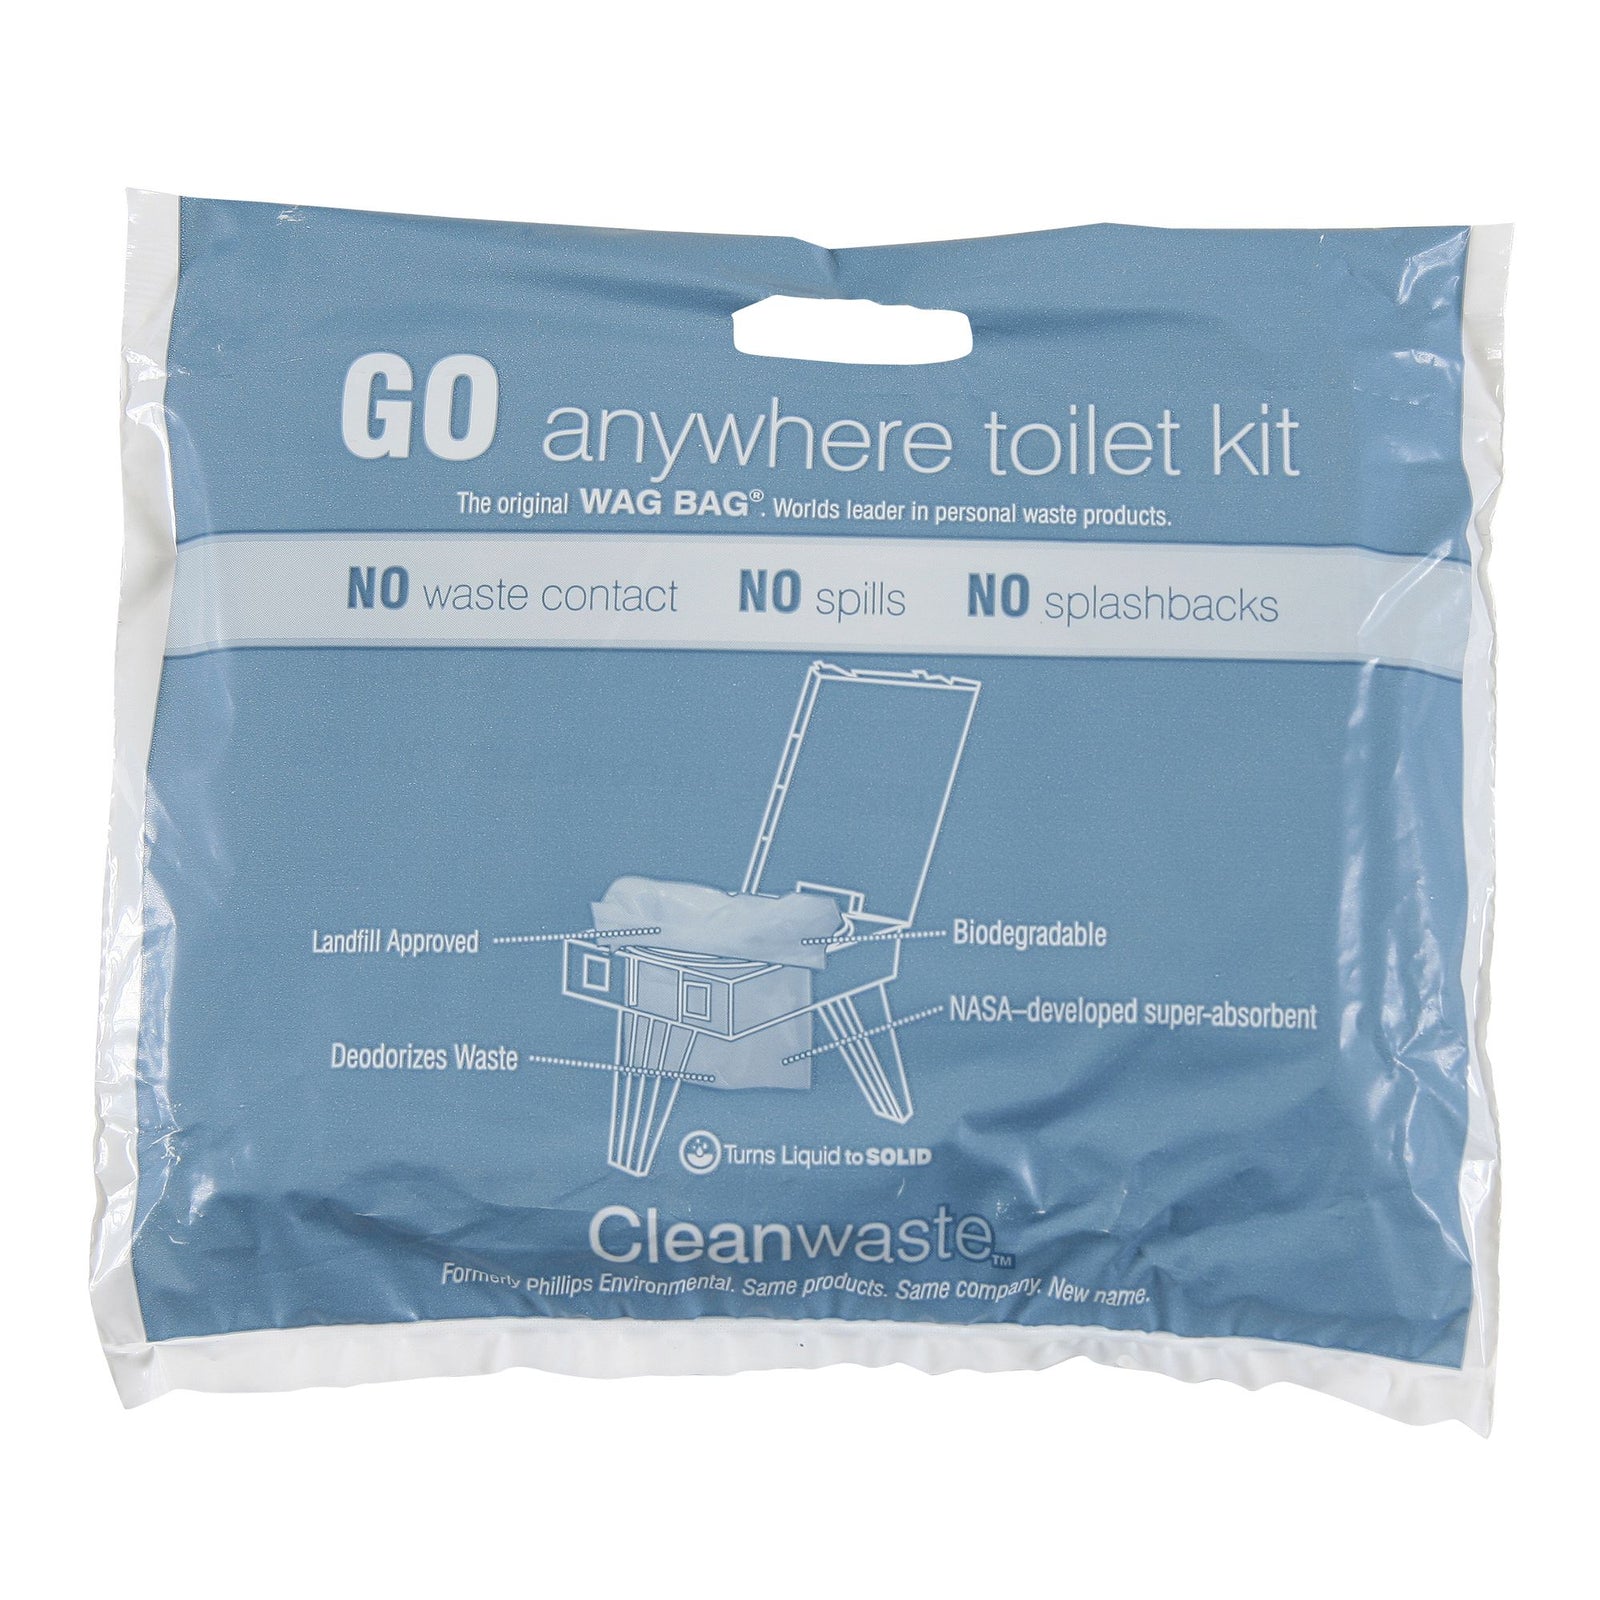 go anywhere wag bag in its packaging